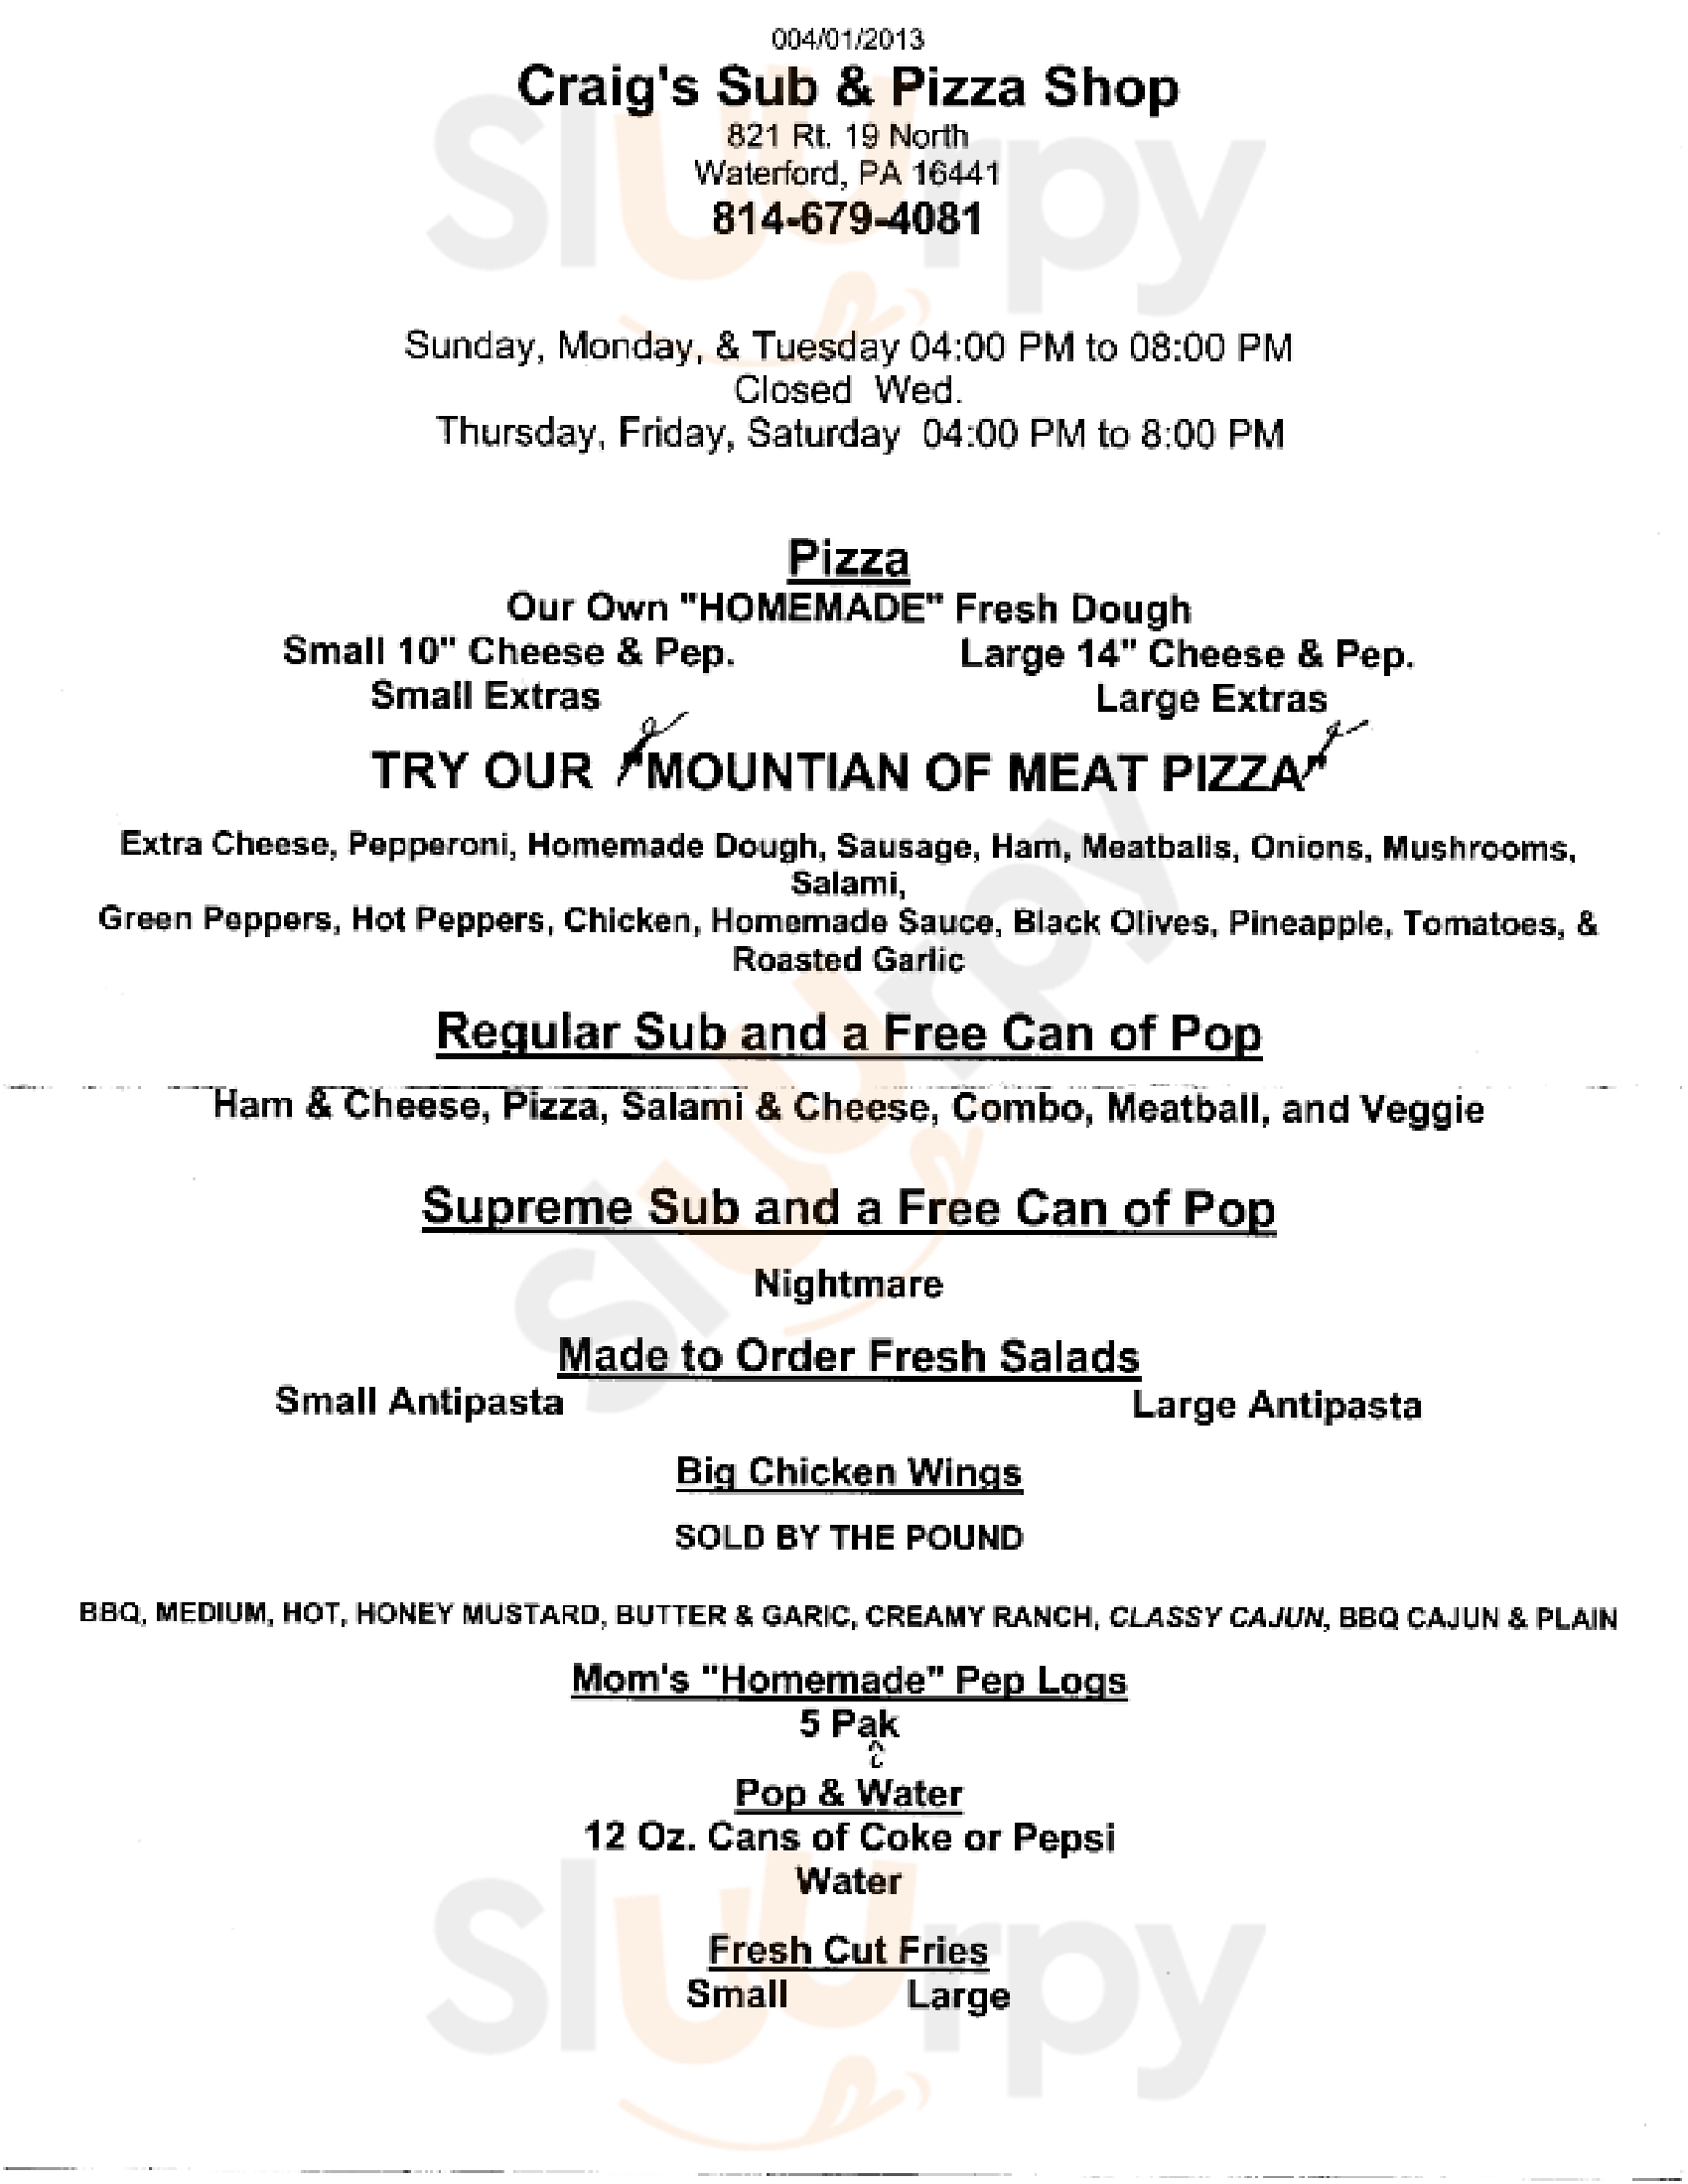 Craig's Sub And Pizza Shop Waterford Menu - 1